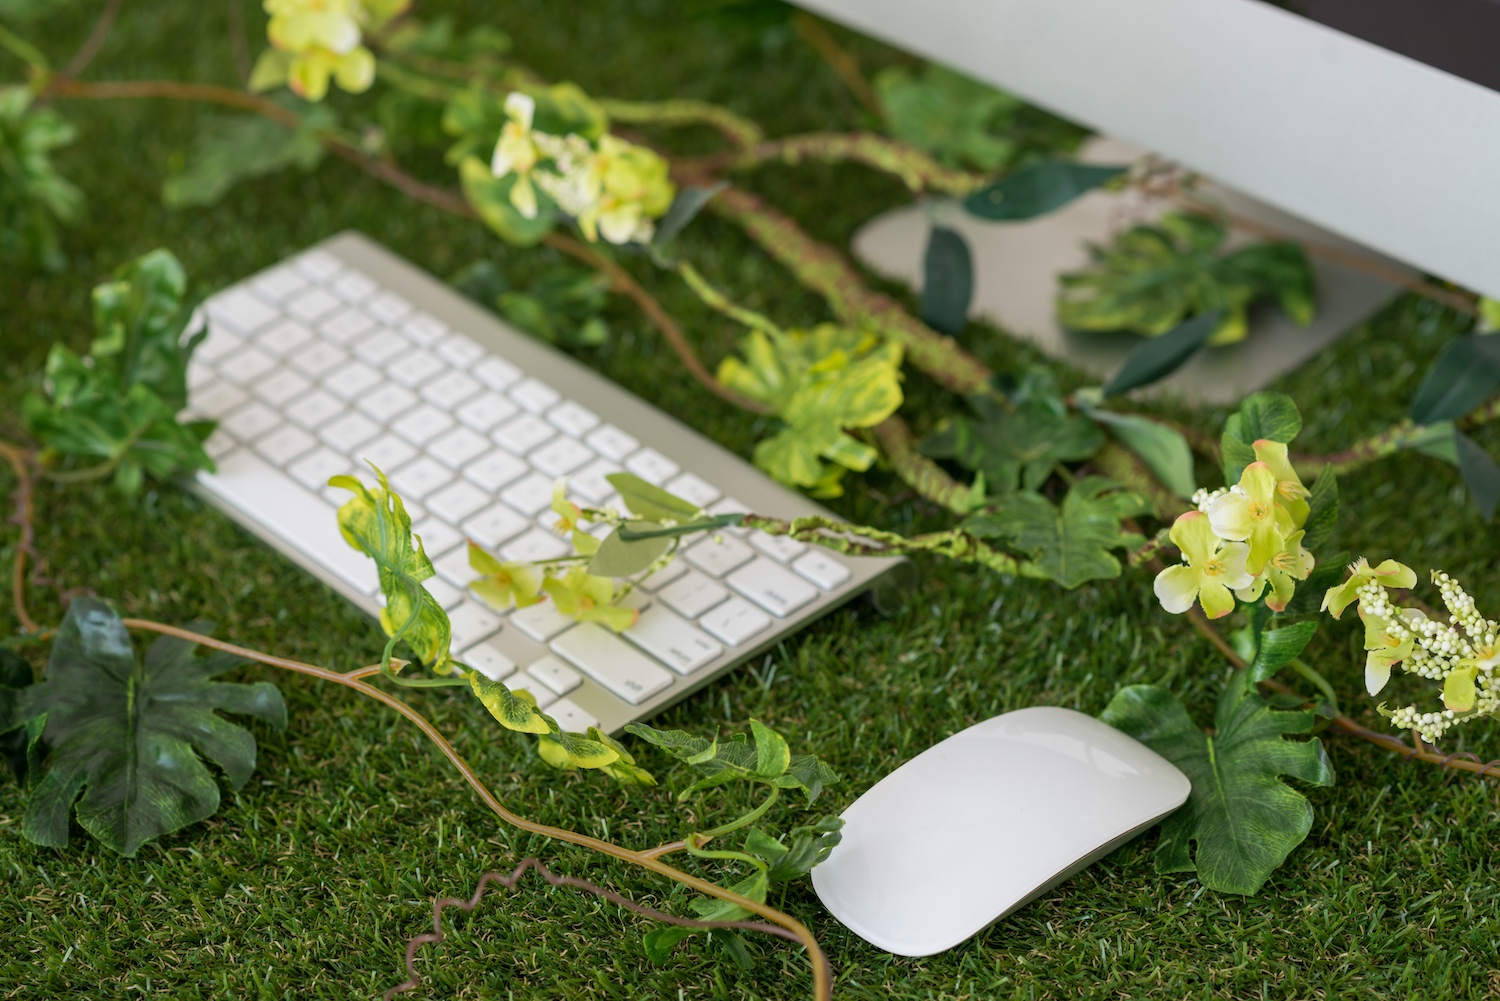 Keypad and mouse among greenery - bringing nature into the office